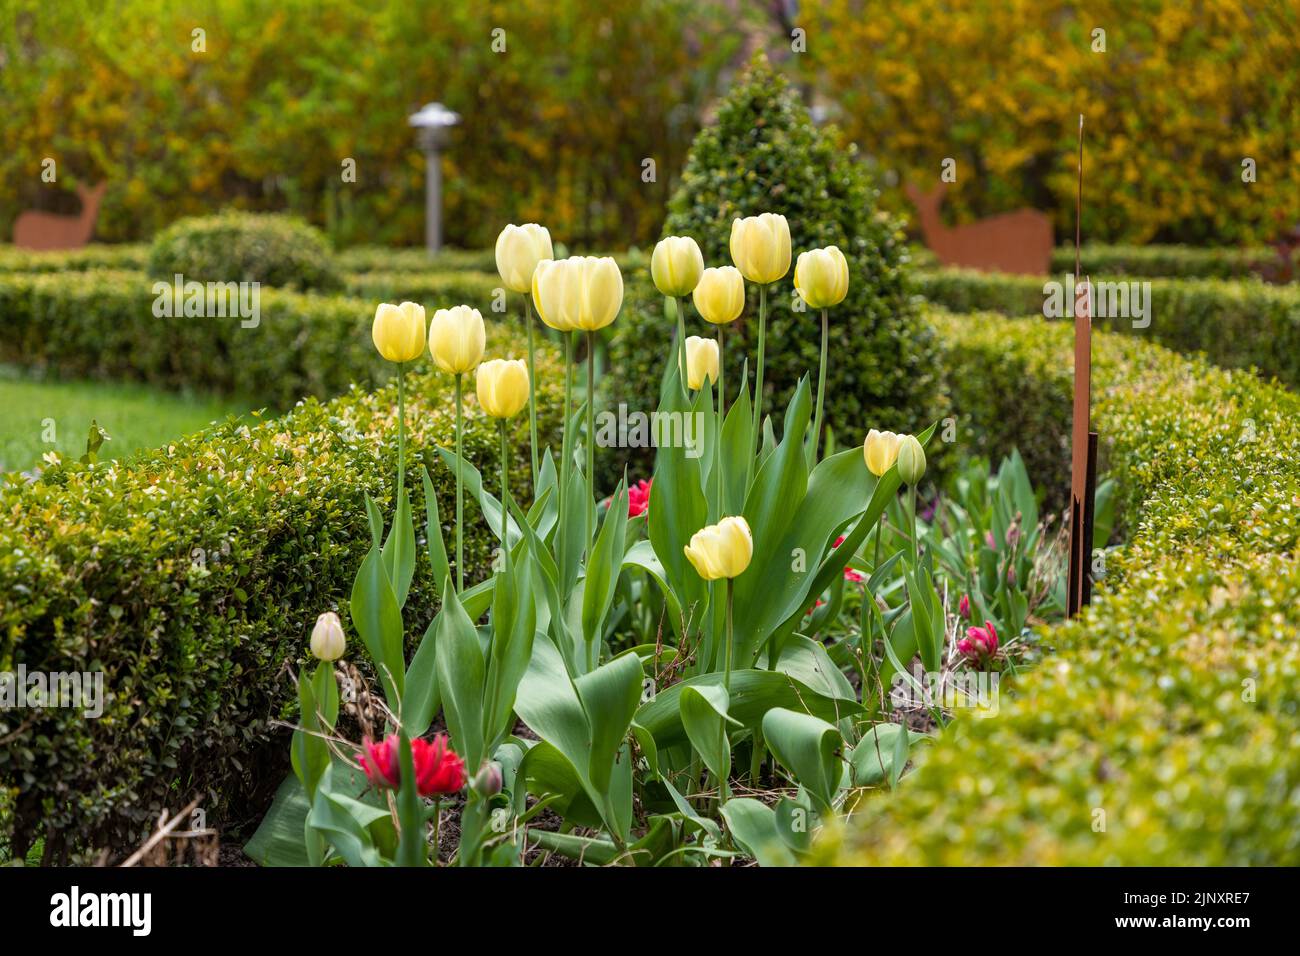 Cream coloured tulips surrounded by pruned hedges in a European garden Stock Photo